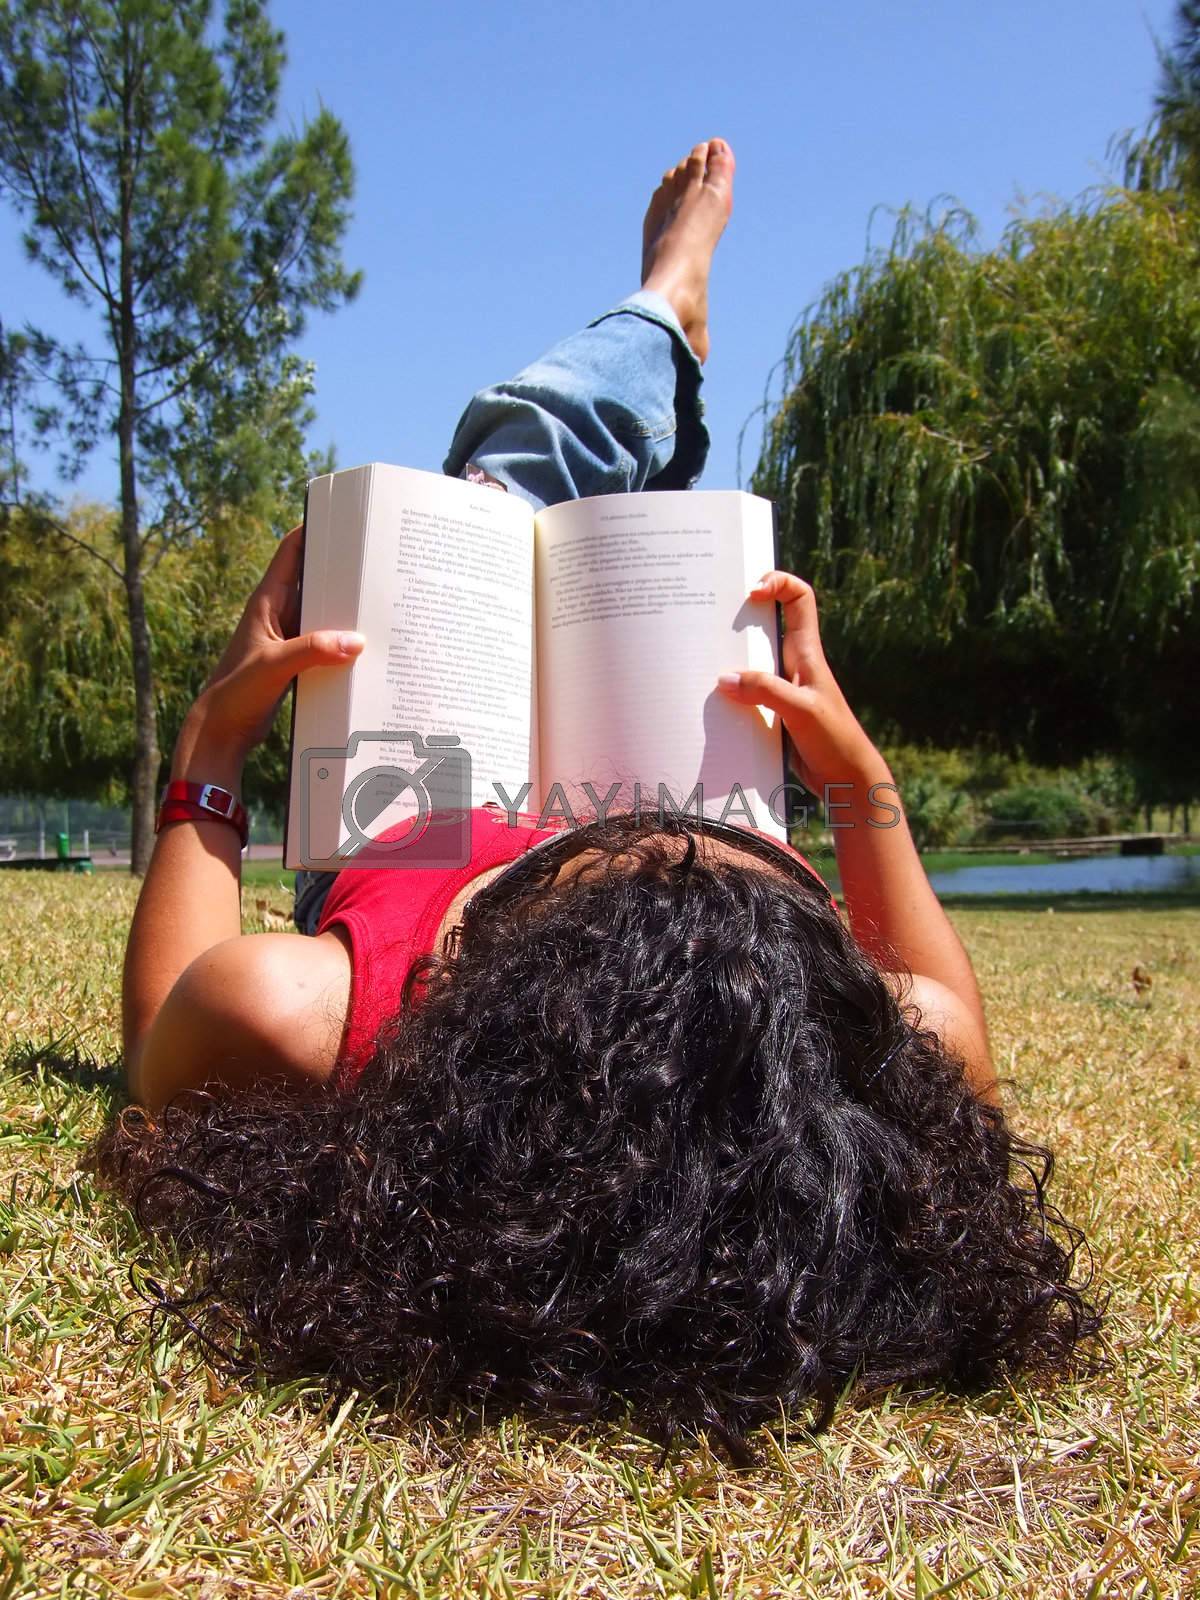 Royalty free image of Woman reading book in park by PauloResende